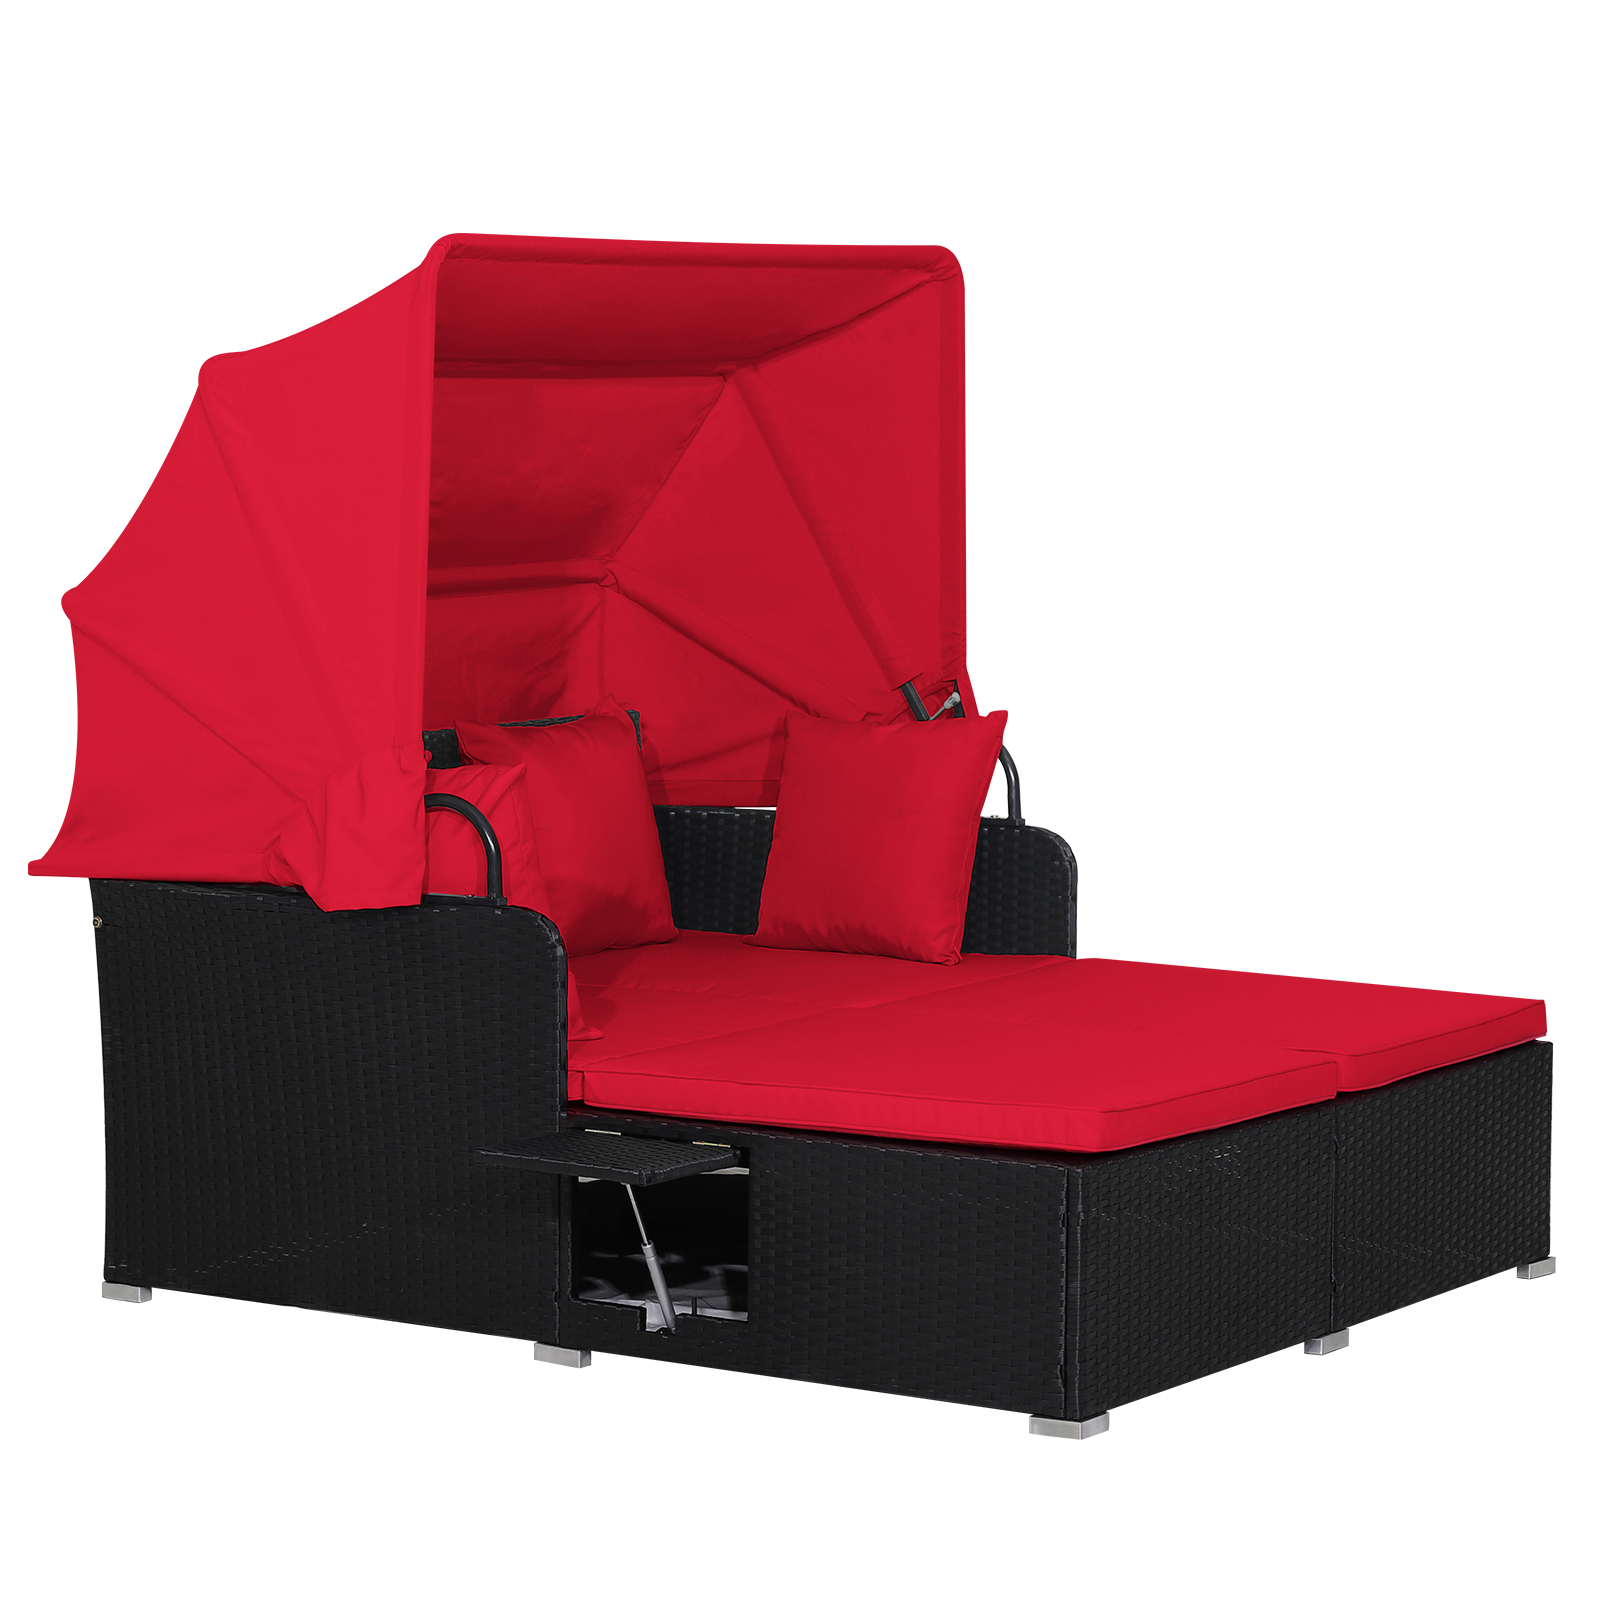 Garden Rattan Daybed with Retractable Canopy and Cushions-Red